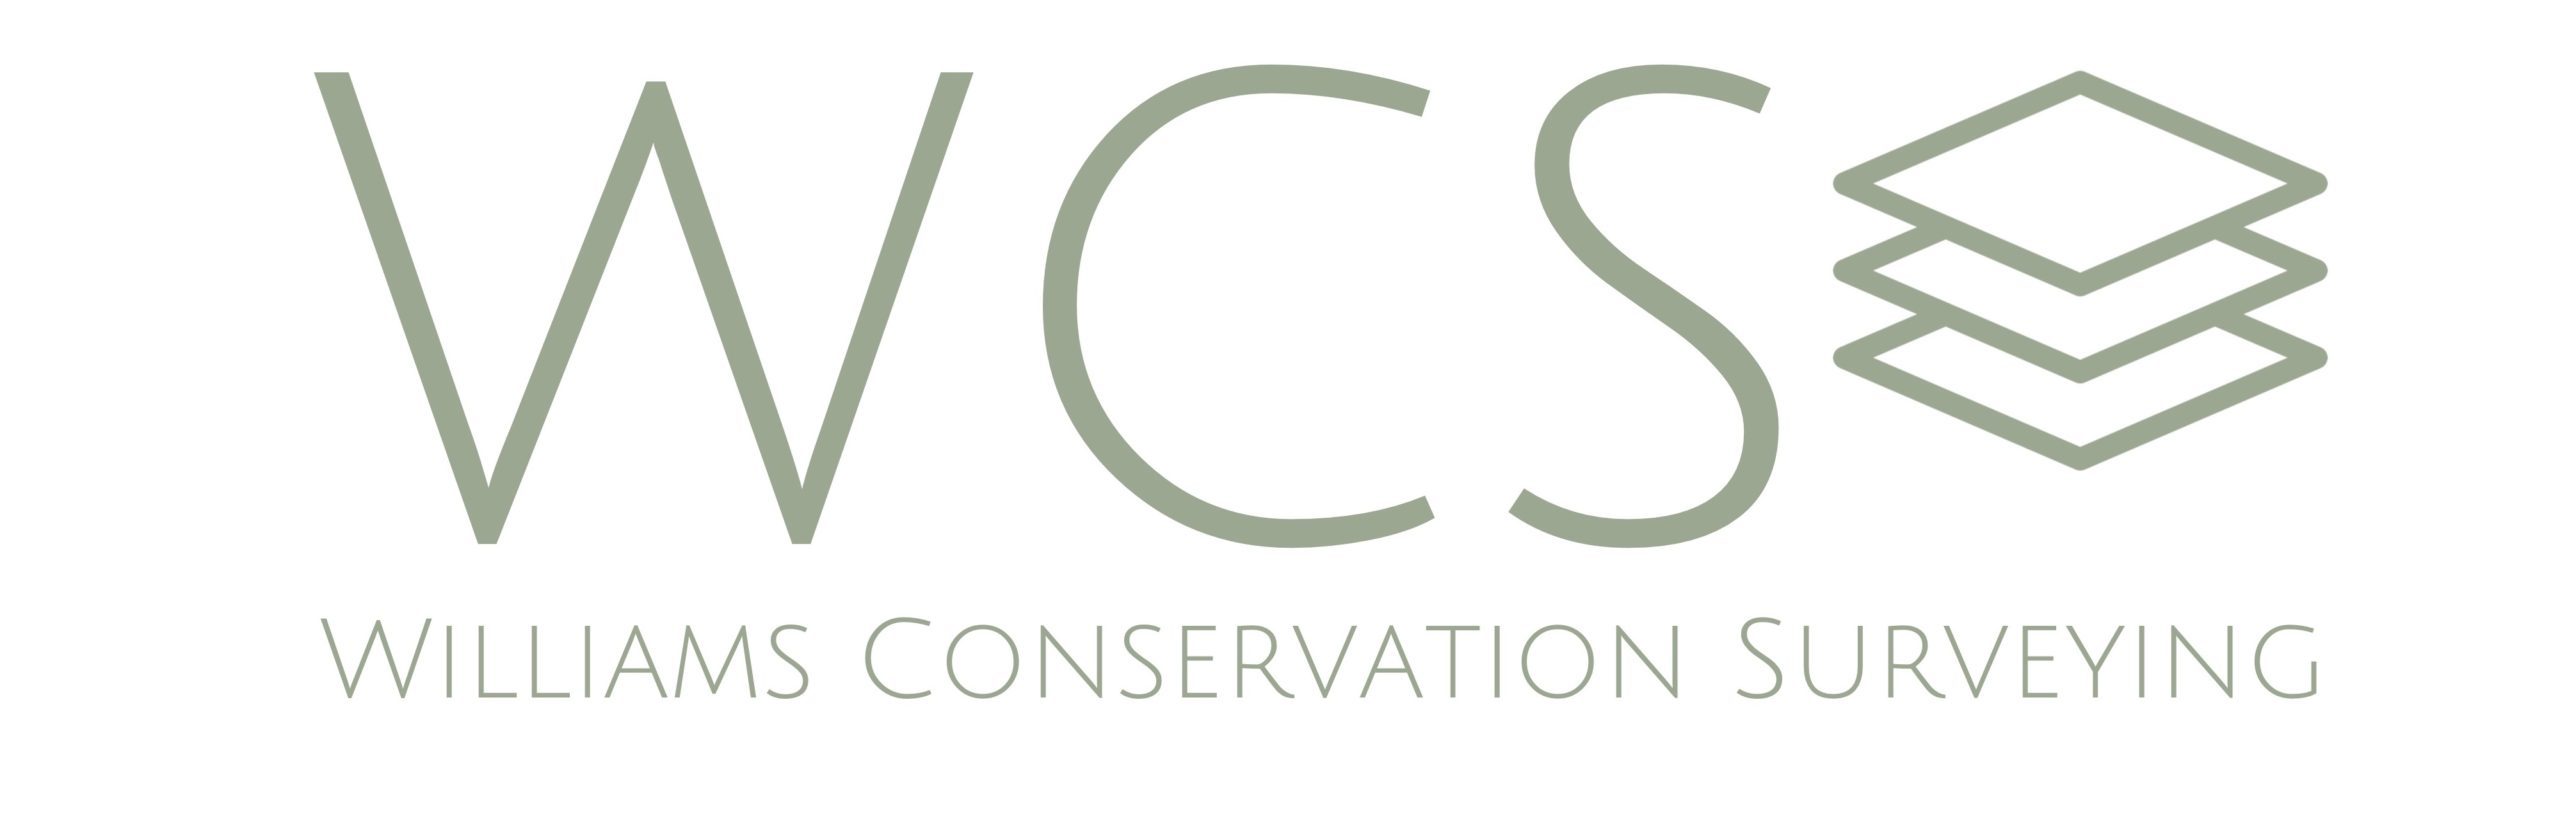 Williams Conservation Surveying